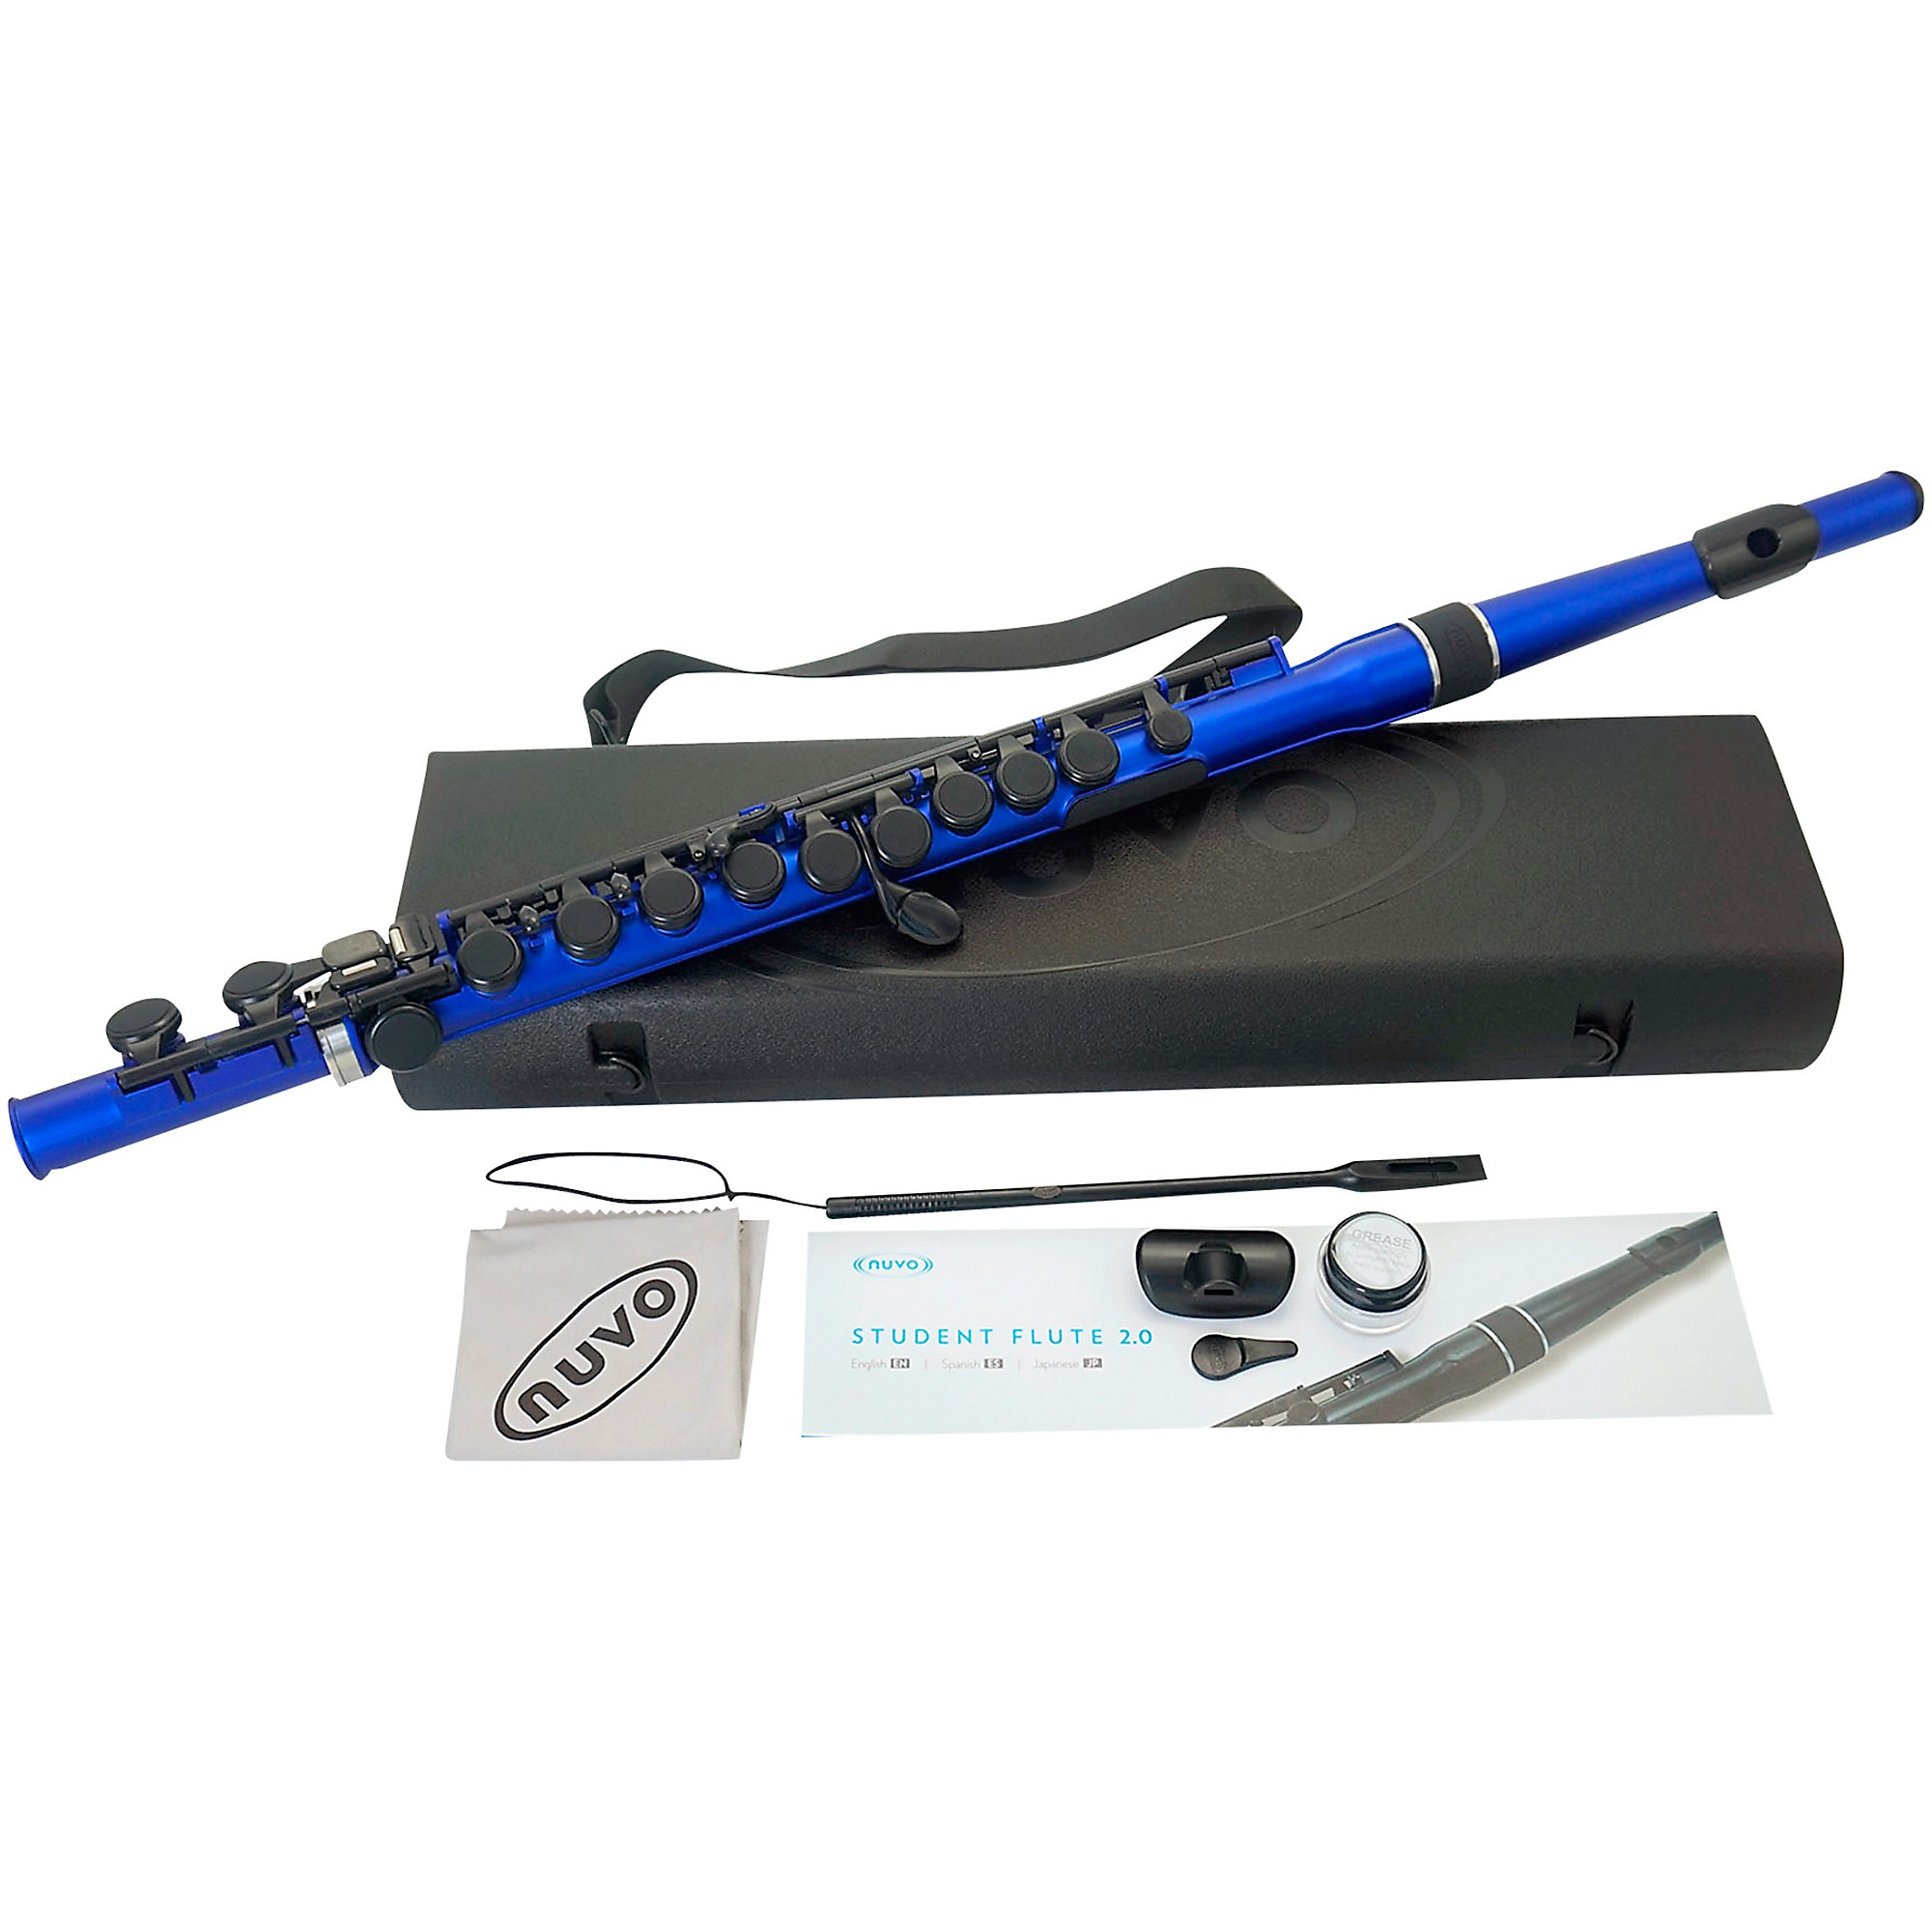 Nuvo Student Flute 2.0 | Music & Arts